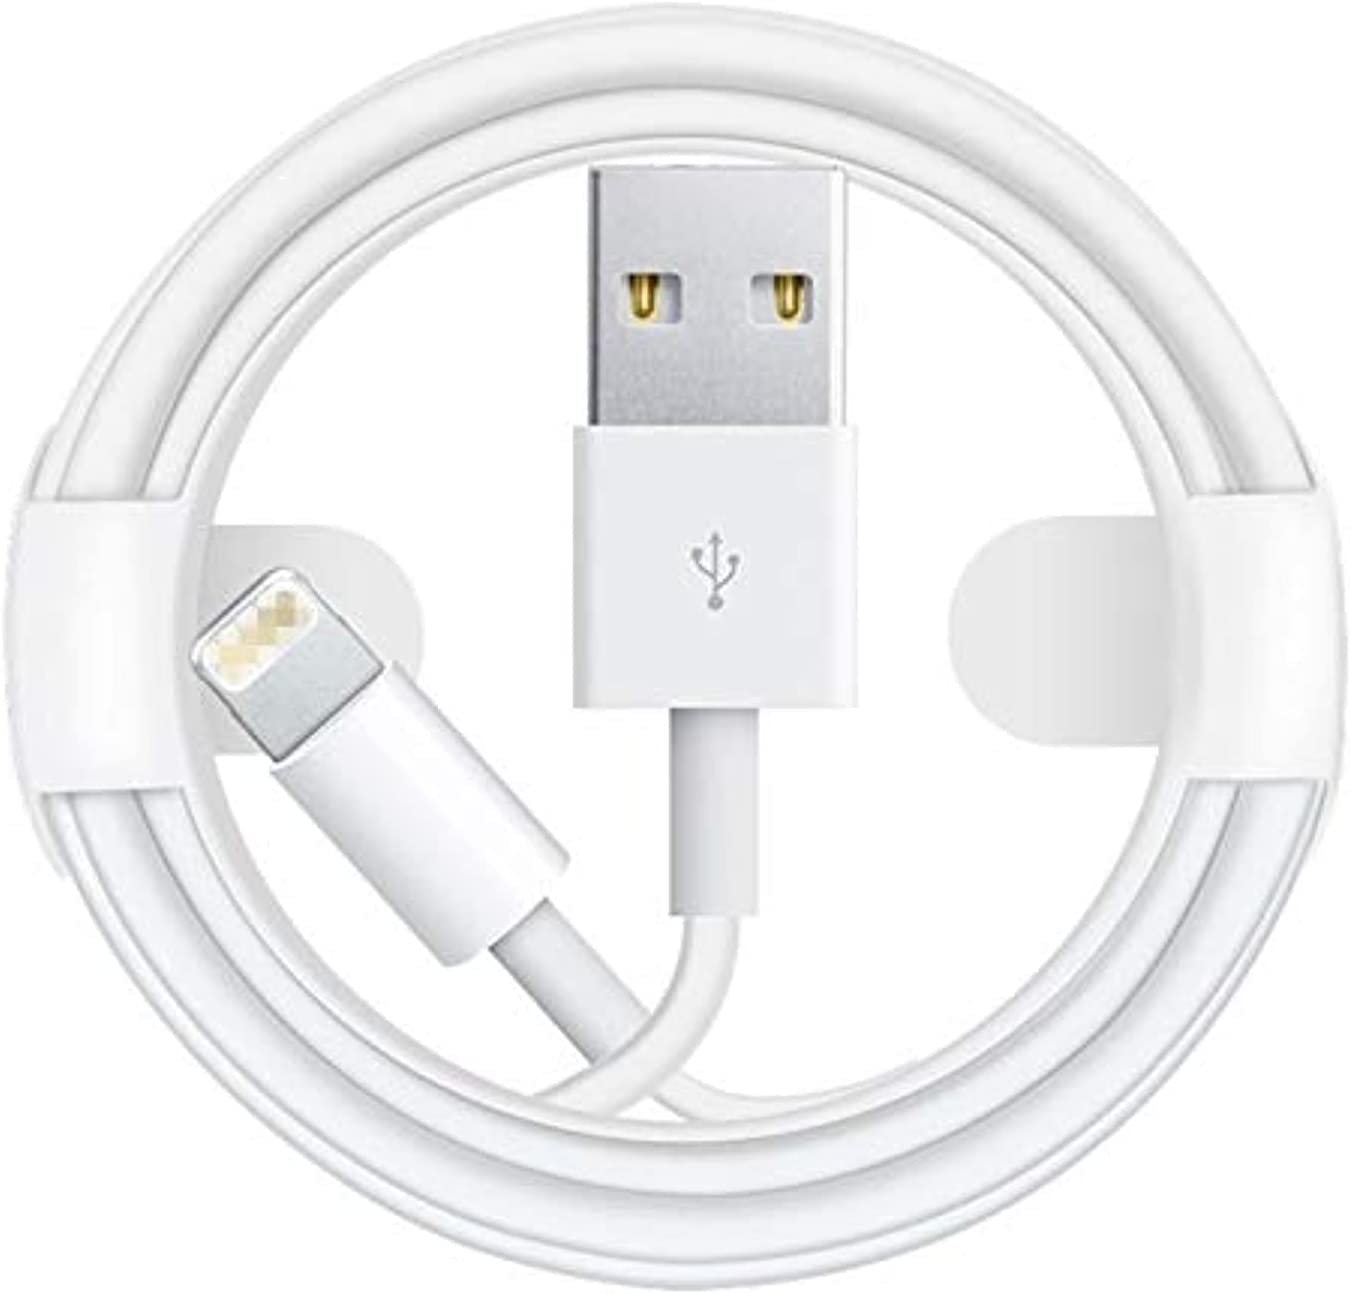 USB to Lightning Charging and Sync Cable, 2 Meters - White